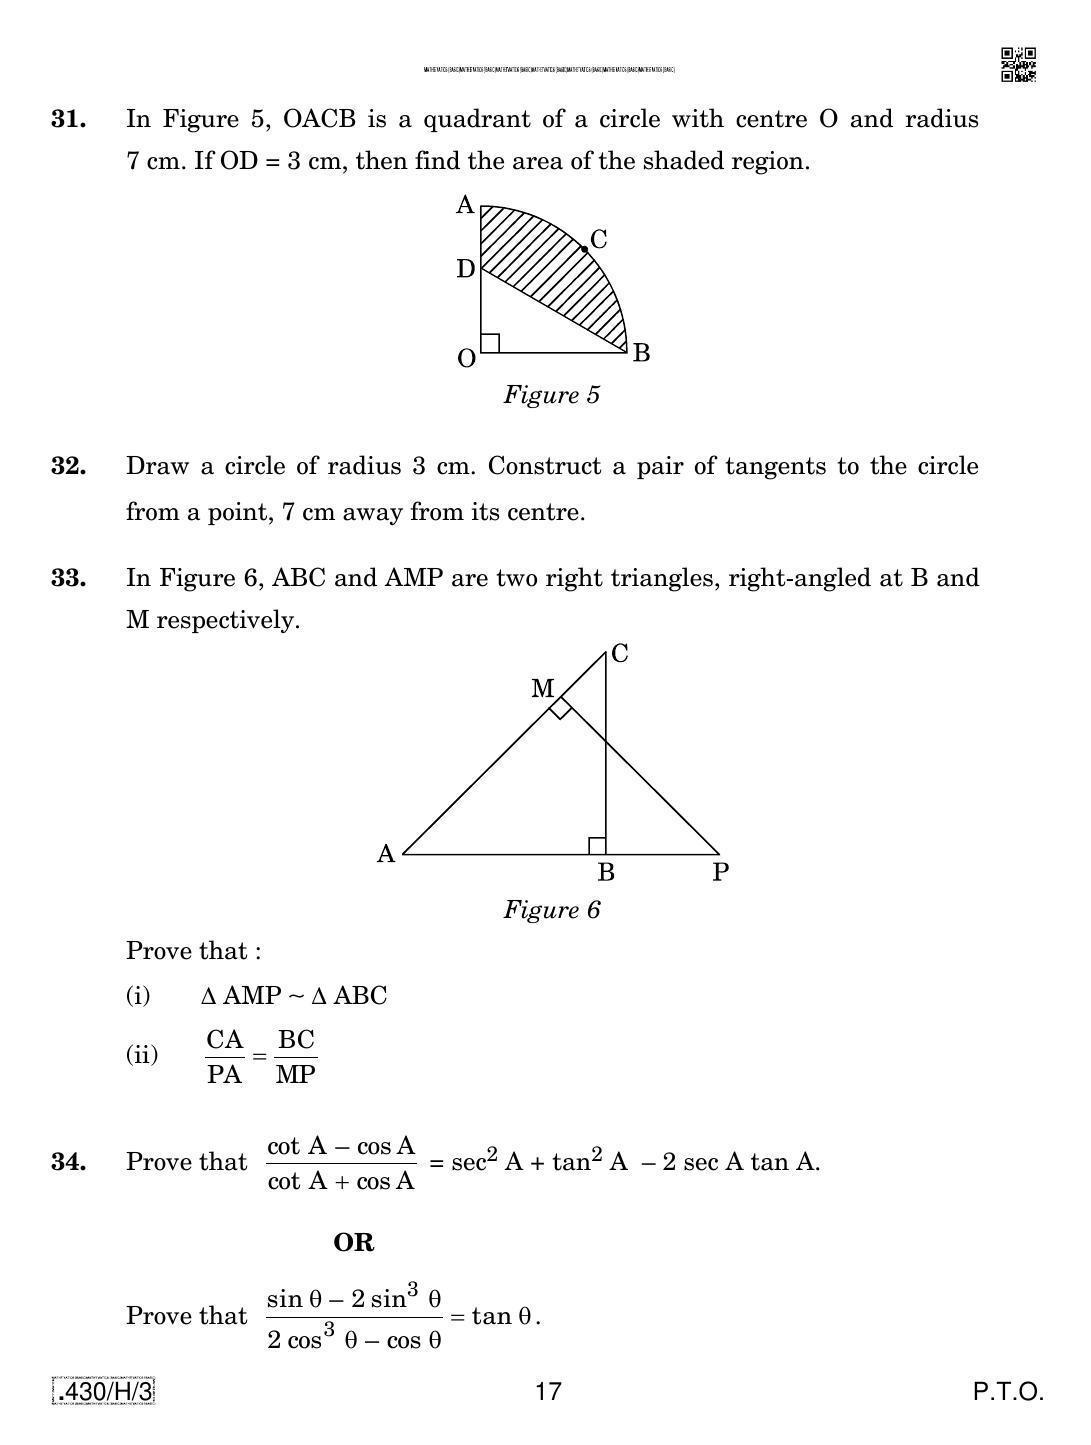 CBSE Class 10 430-C-3 - Maths (Basic) 2020 Compartment Question Paper - Page 17